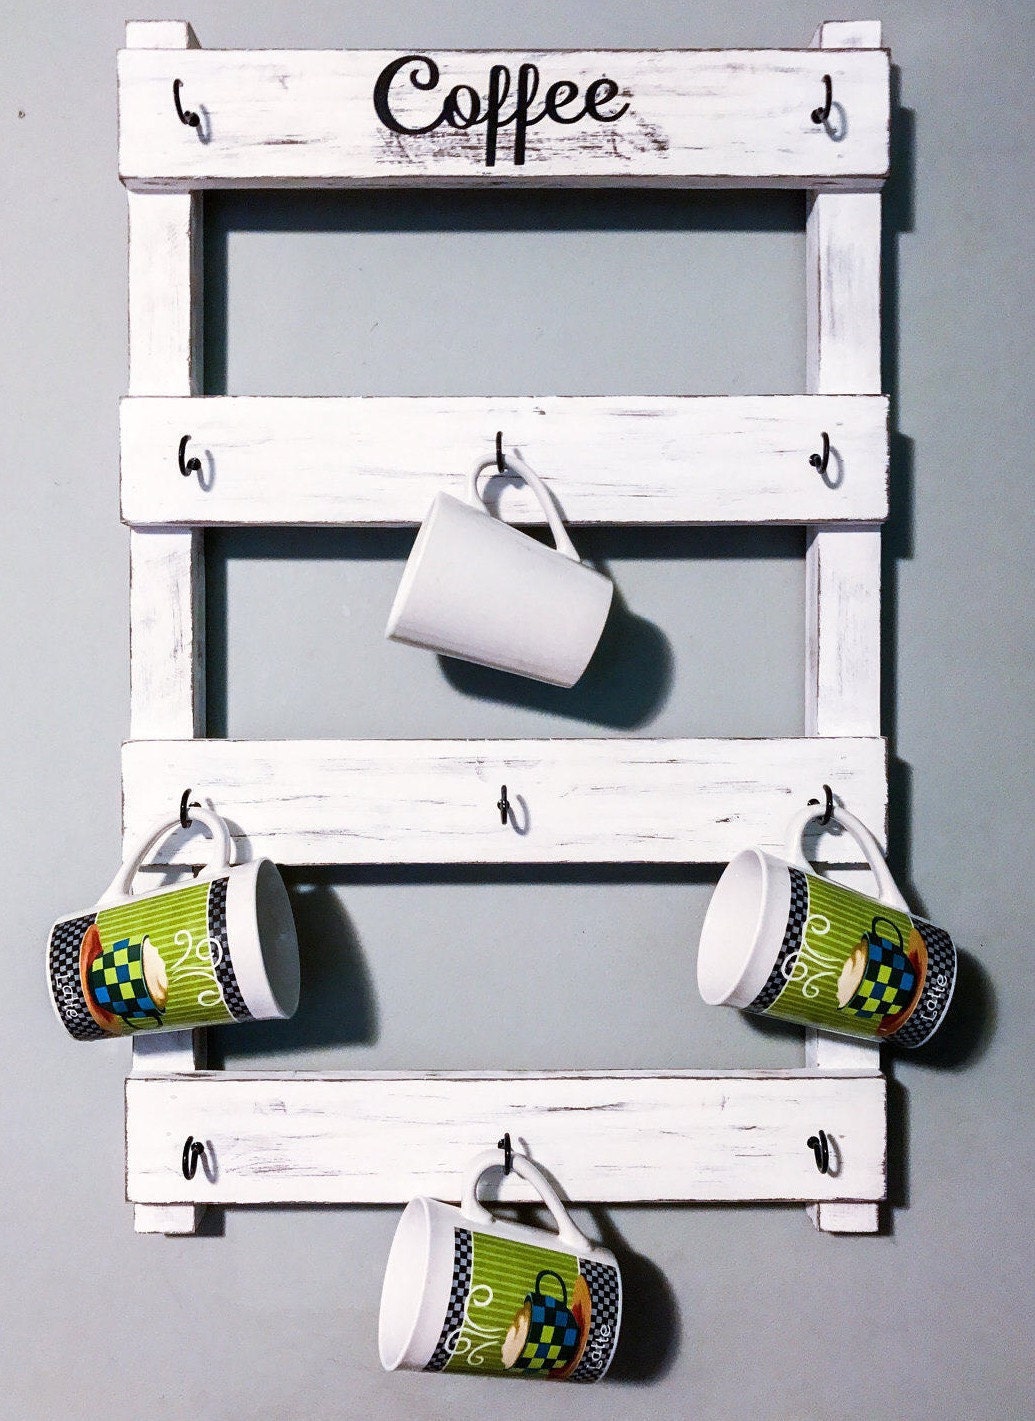 Coffee Cup Rack, Coffee Cup Display, Mother's Day, Housewarming